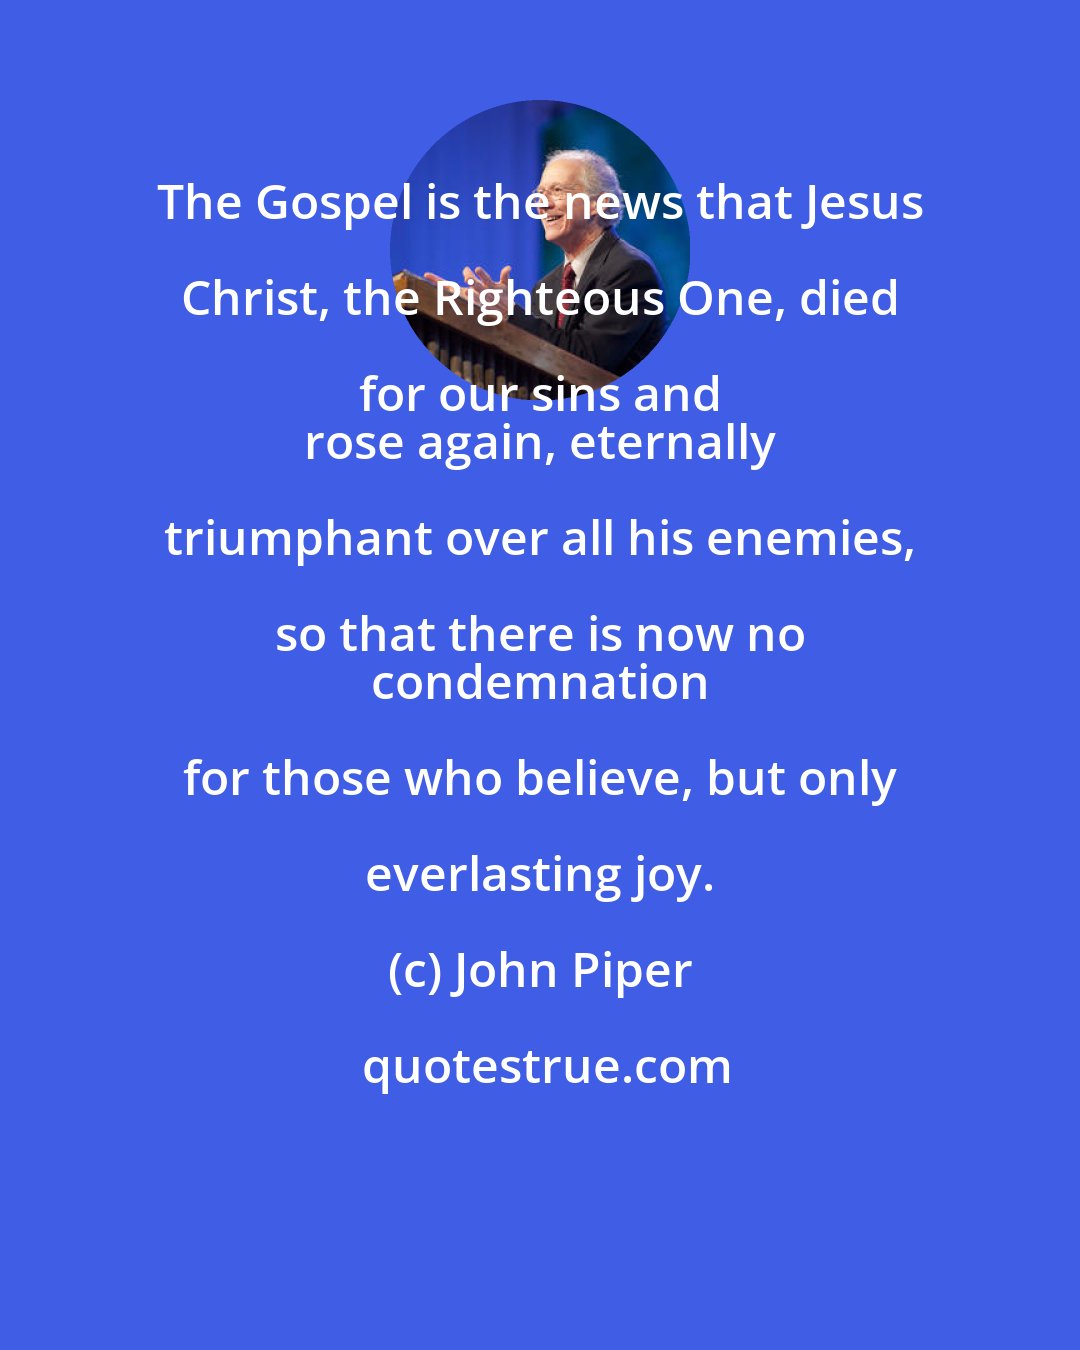 John Piper: The Gospel is the news that Jesus Christ, the Righteous One, died for our sins and 
 rose again, eternally triumphant over all his enemies, so that there is now no 
 condemnation for those who believe, but only everlasting joy.